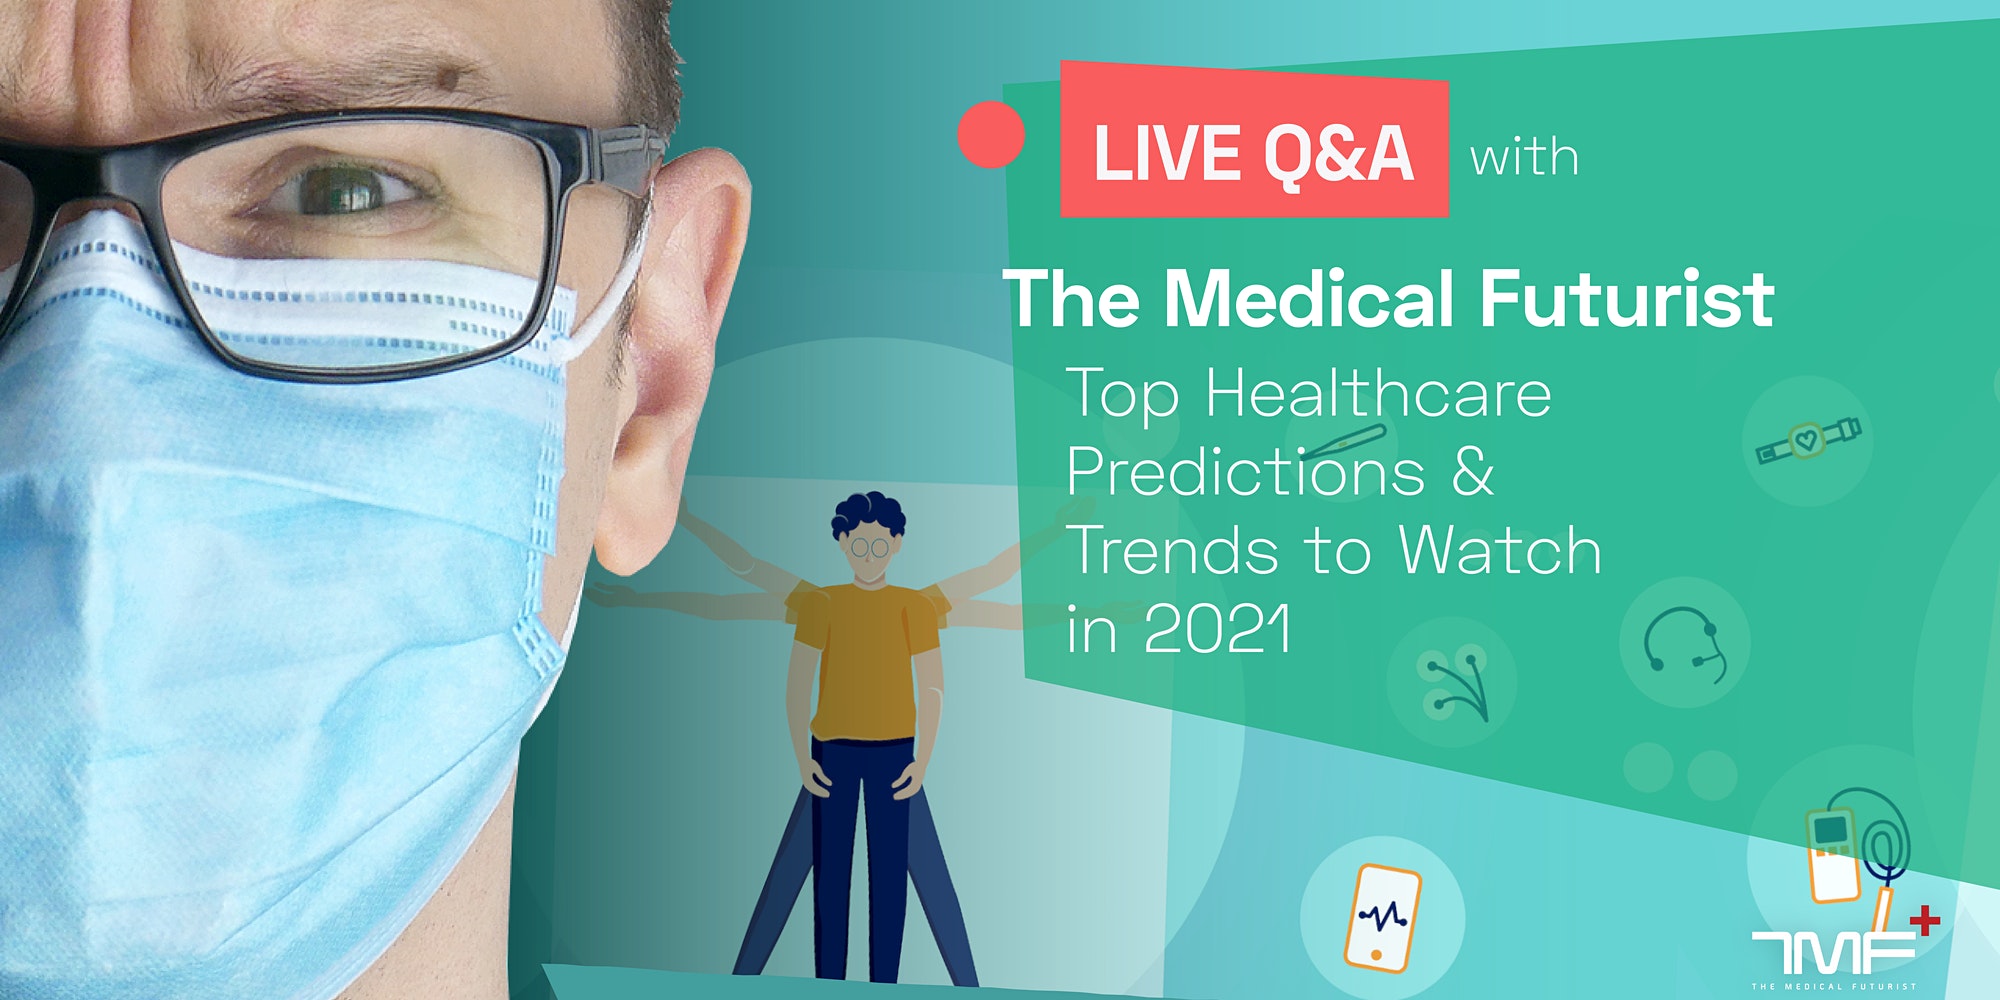 Top Healthcare Predictions & Trends to Watch in 2021 - The Medical Futurist